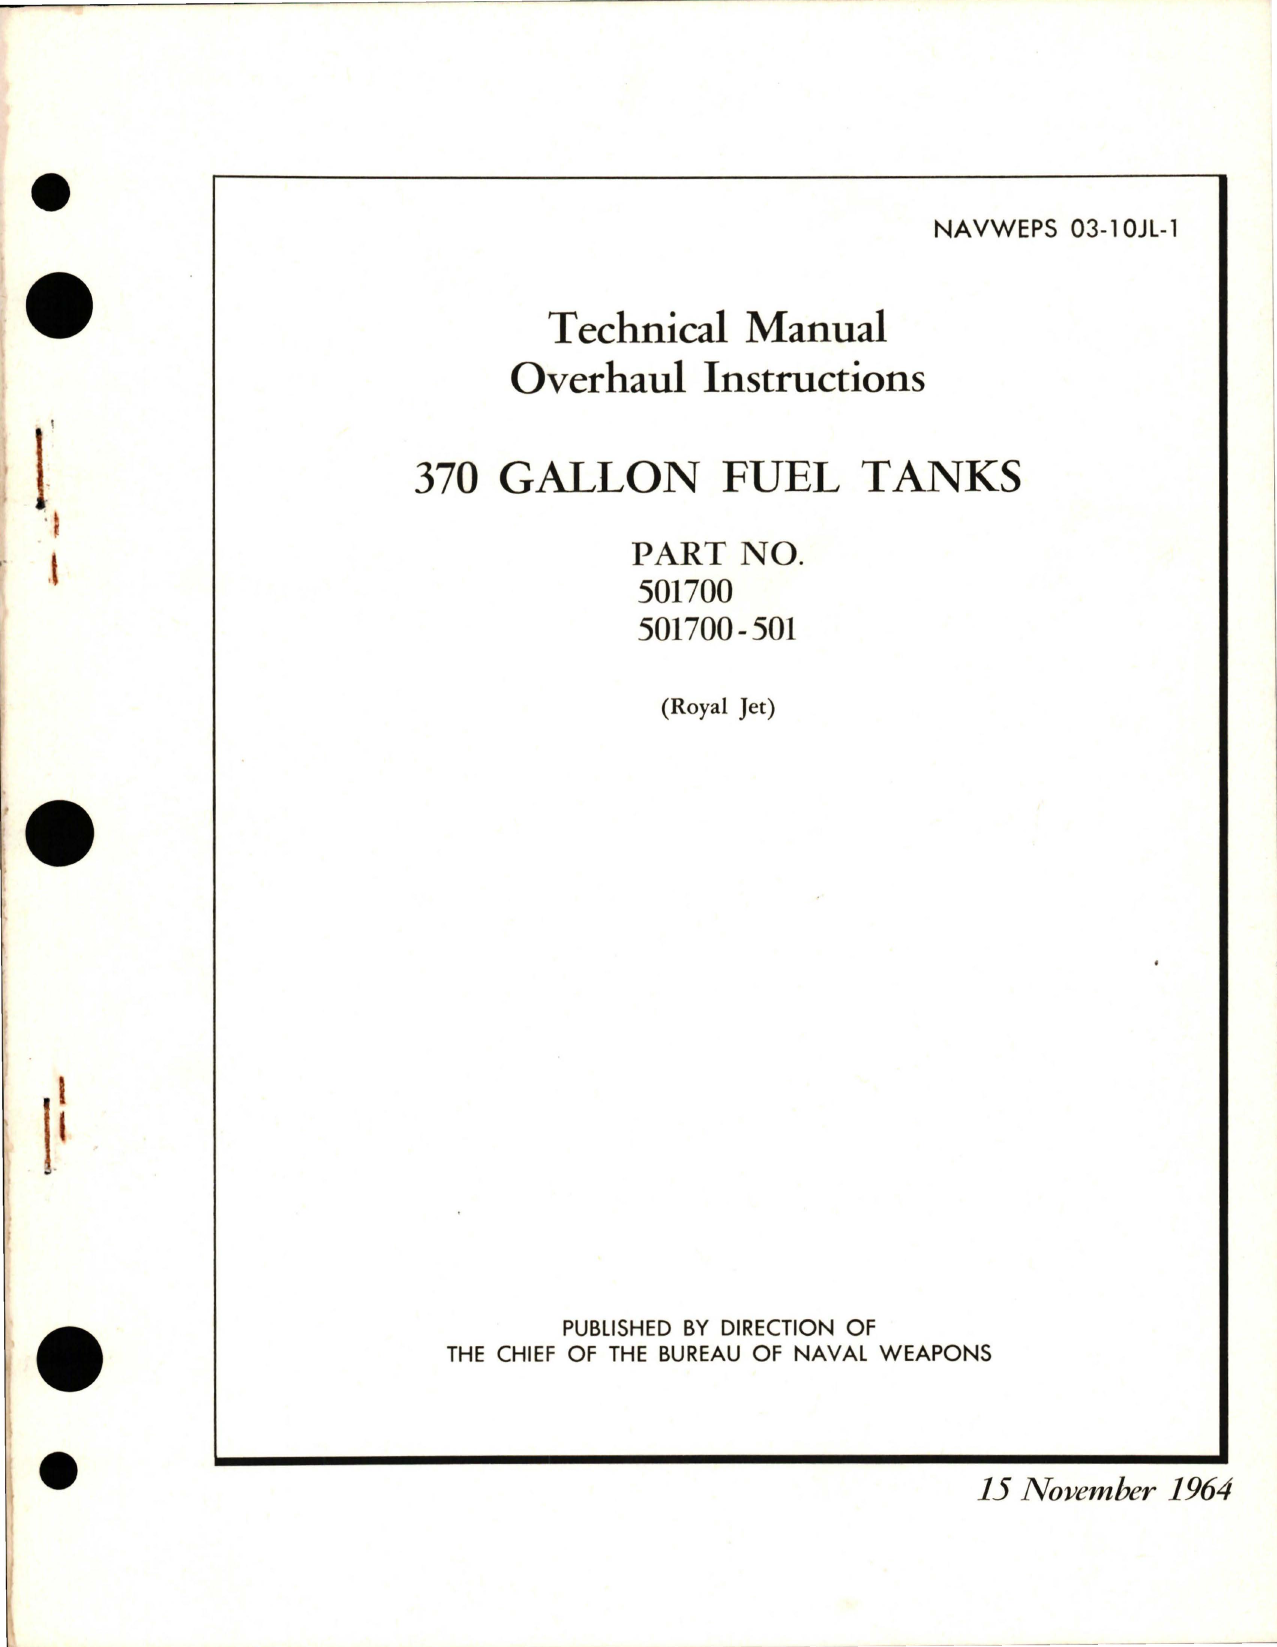 Sample page 1 from AirCorps Library document: Overhaul Instructions for 370 Gallon Fuel Tanks - Parts 501700, 501700-501